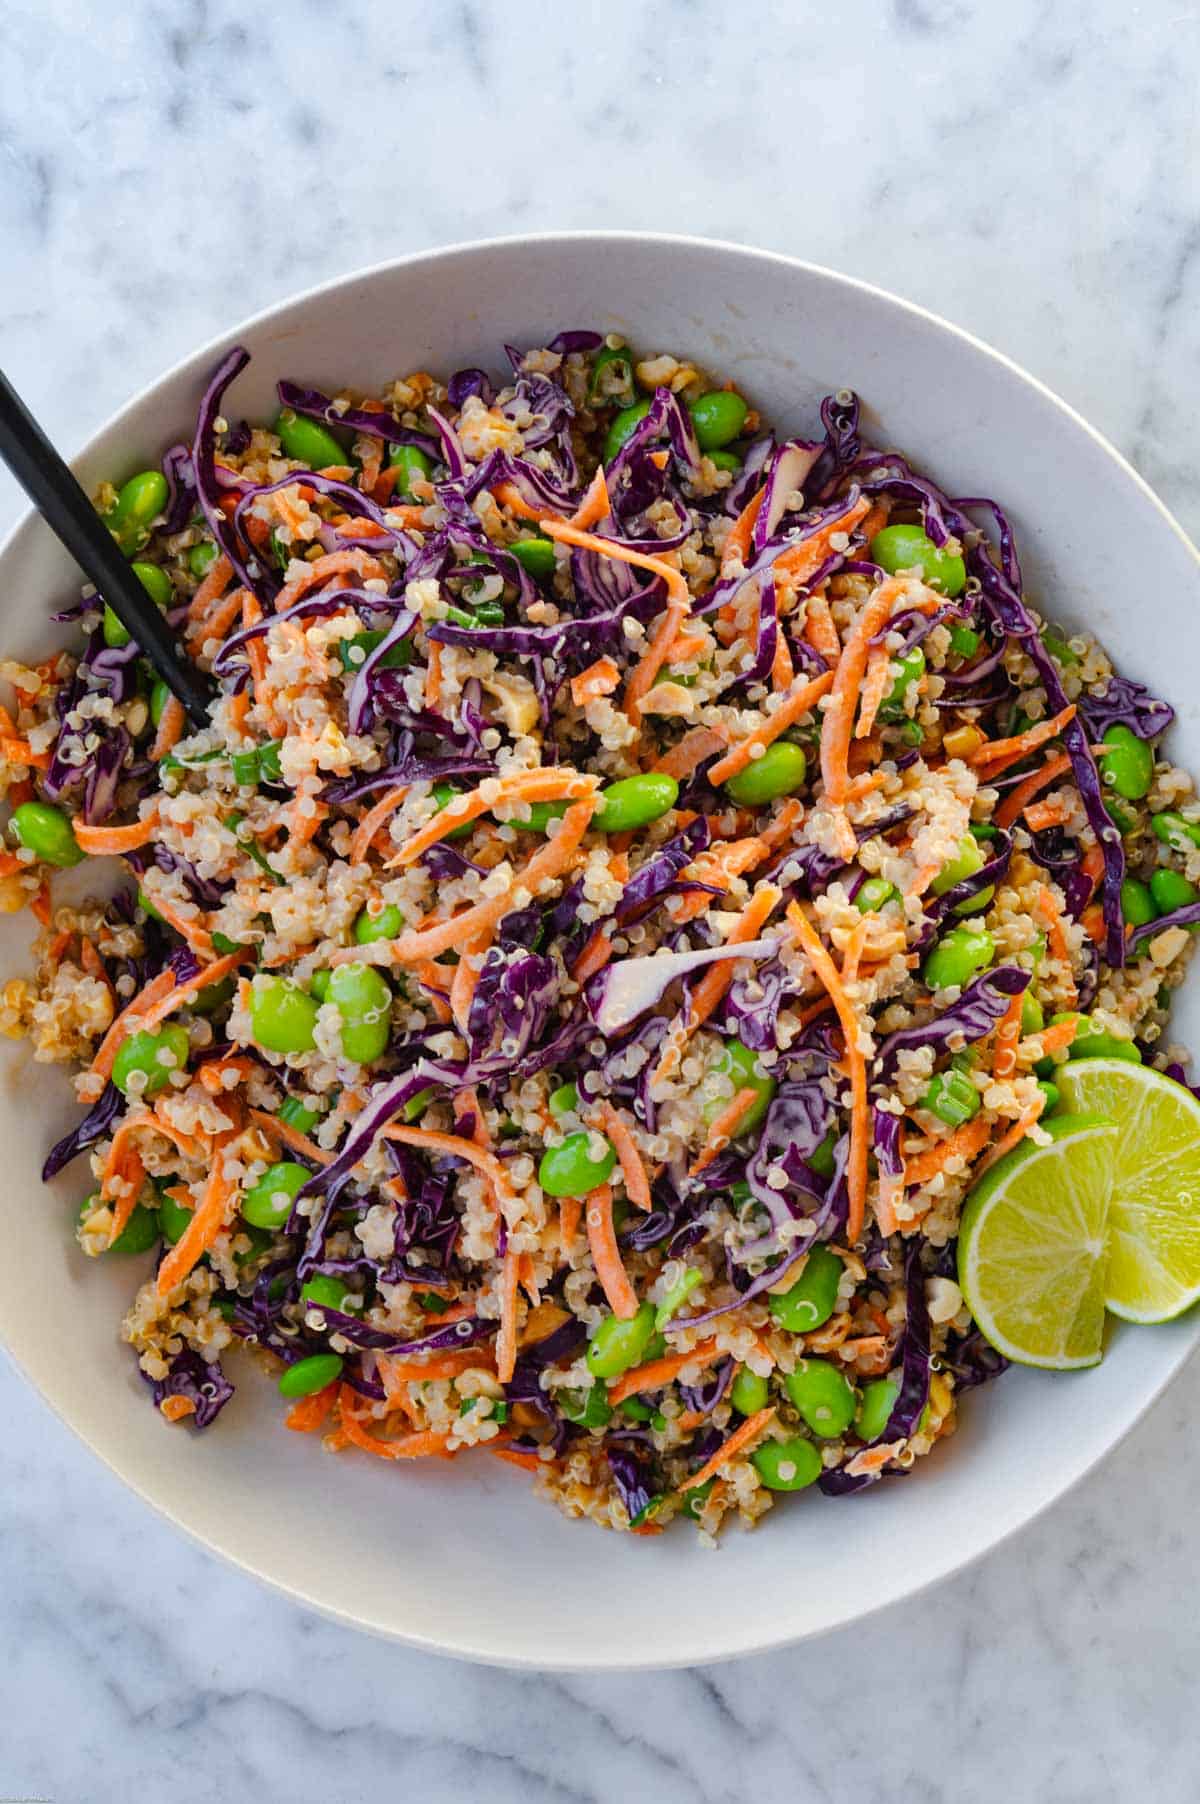 Quinoa, edamame, shredded carrots and red cabbage, chopped green onion, and chopped peanuts mixed together in a white bowl with a black fork. Served with lime wedges.